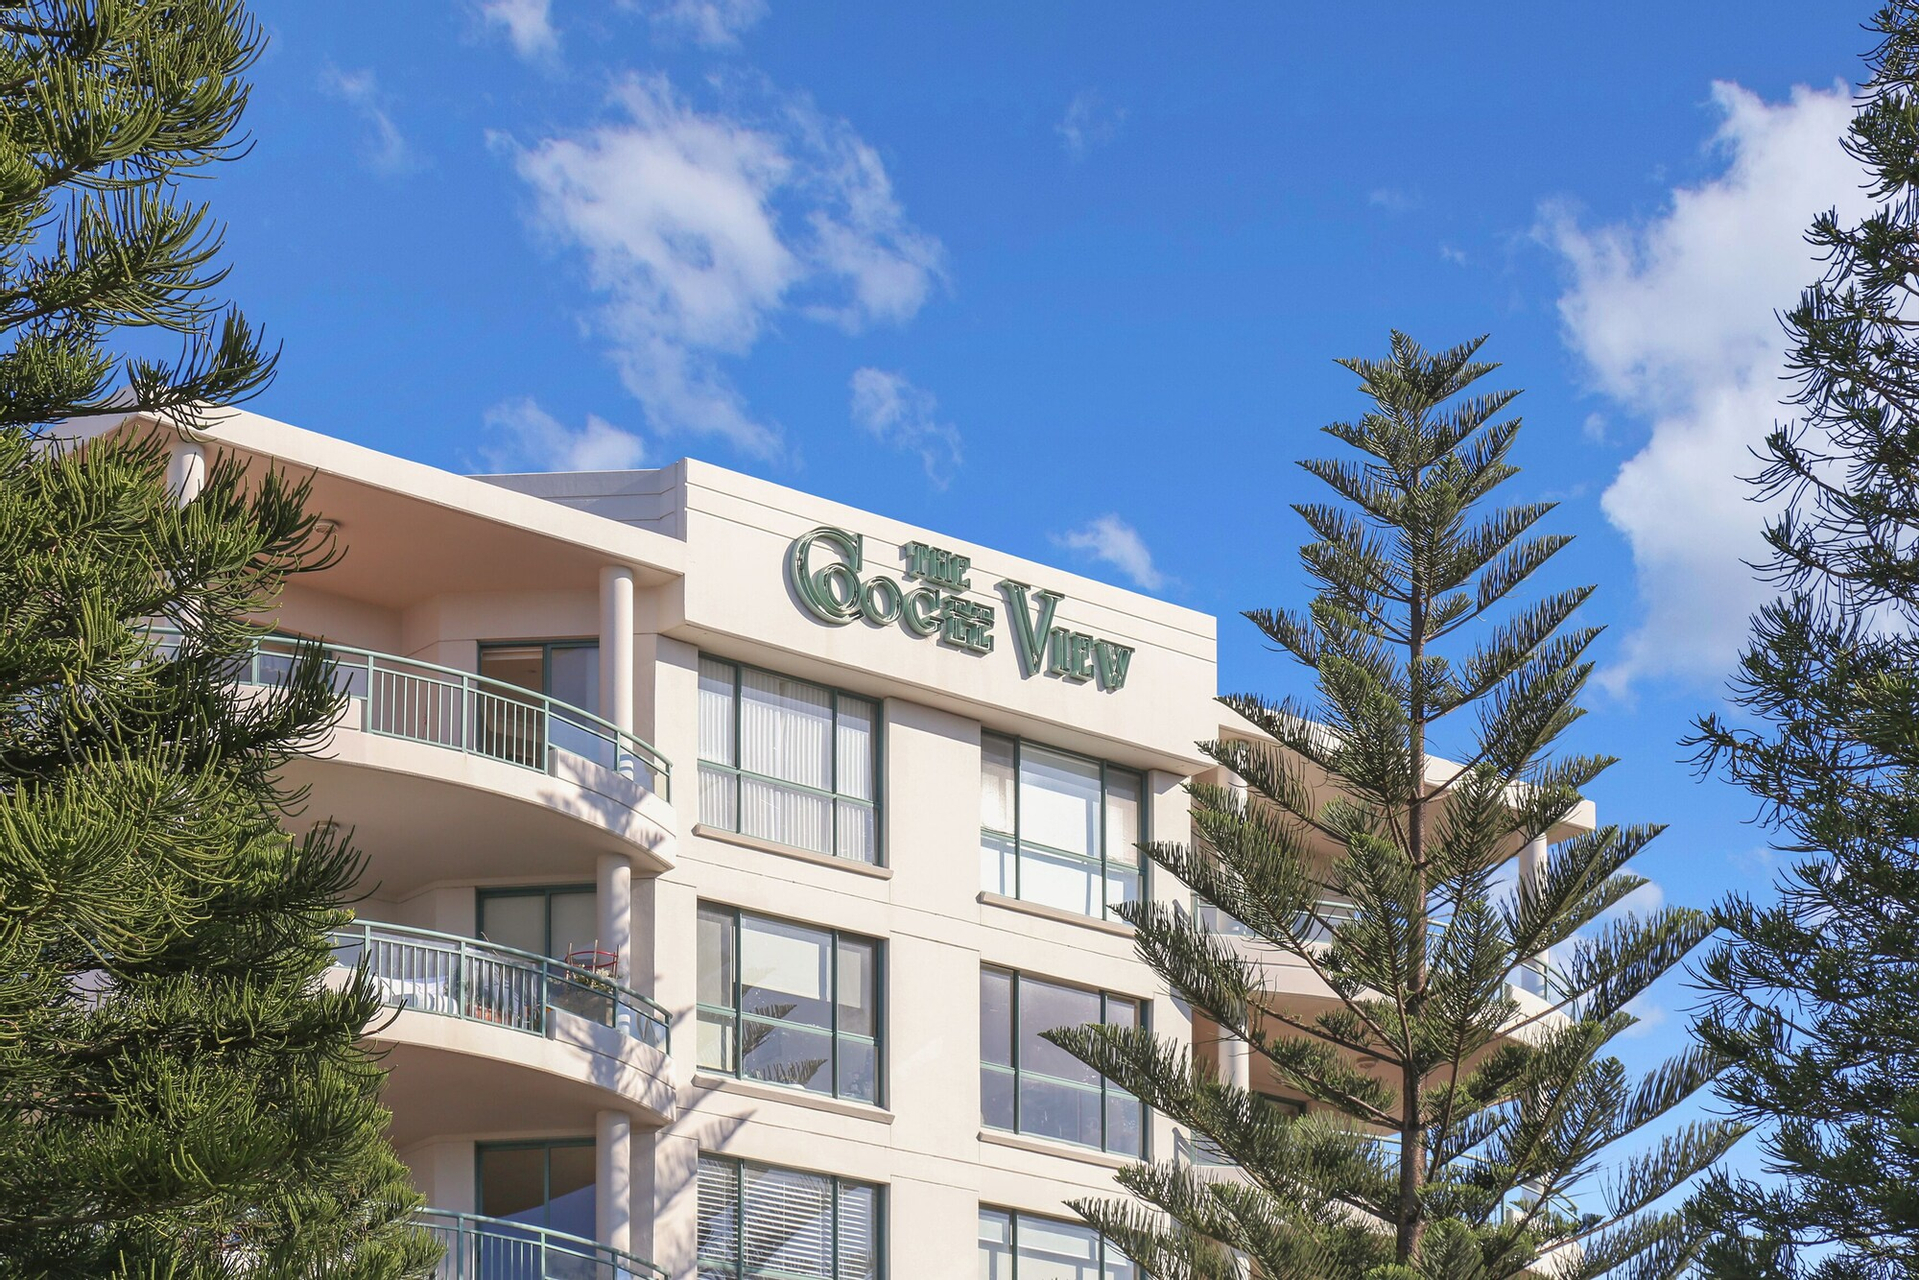 Exterior & Views 1, AEA The Coogee View Serviced Apartments, Randwick